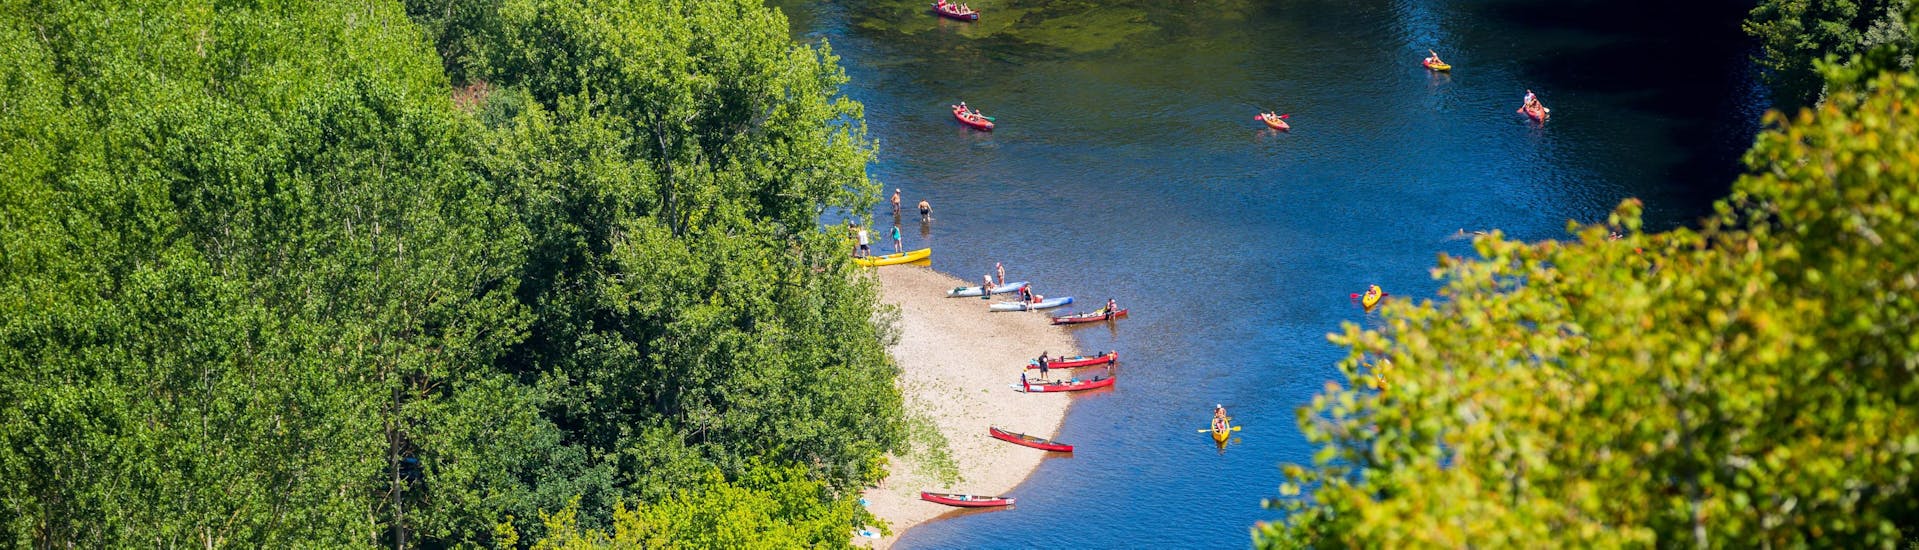 A group of people enjoy their 22 km canoe trip with Canoës Randonnée Dordogne.